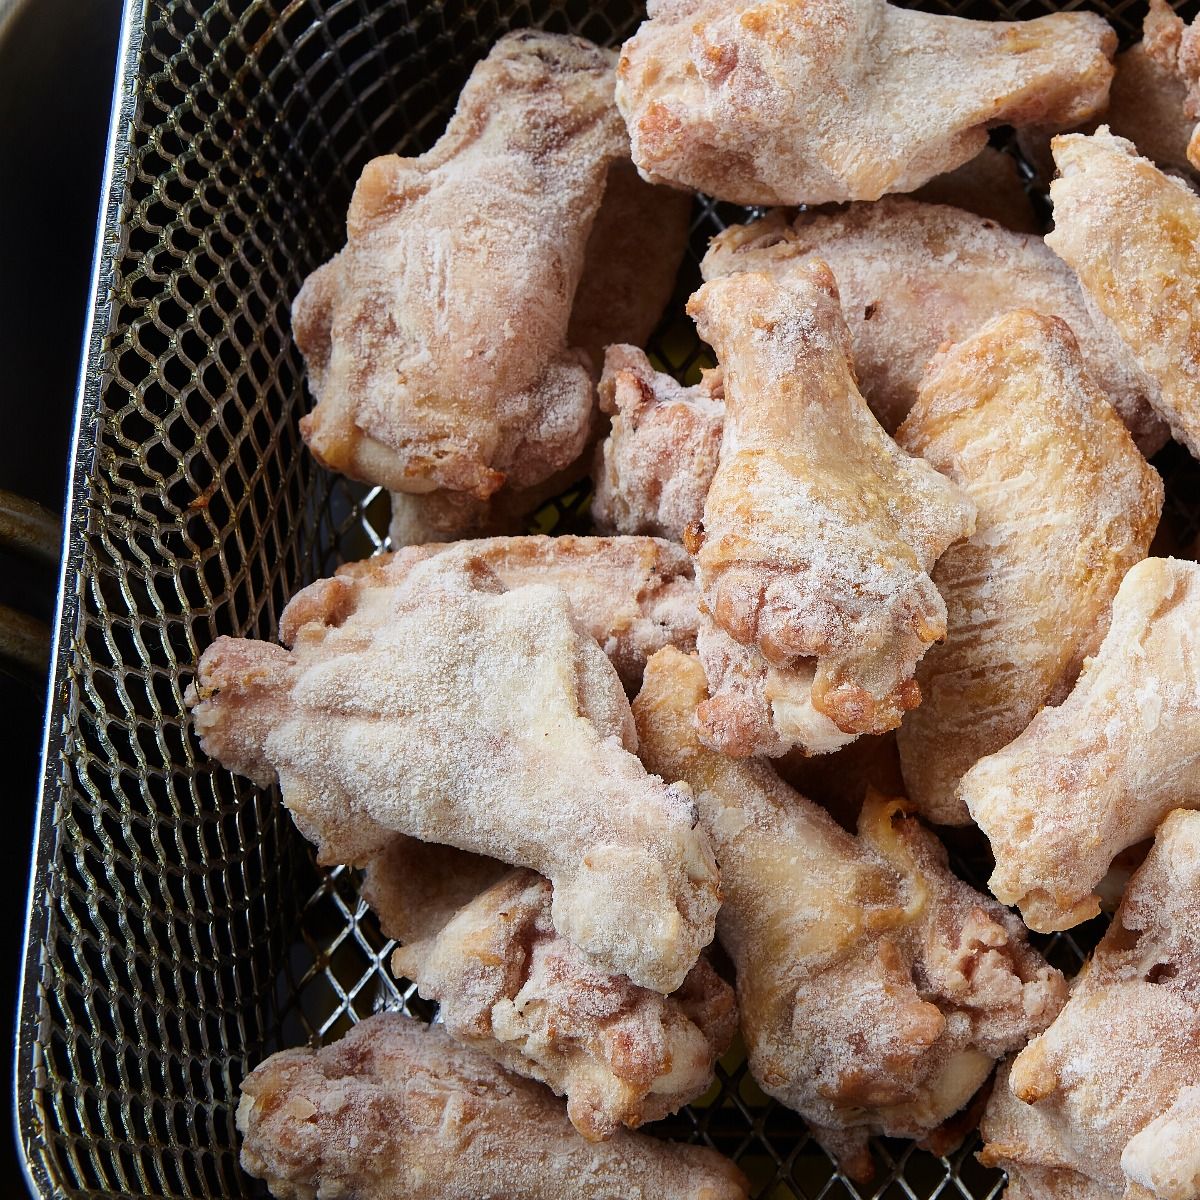 Plain chicken wings cut-up, fully cooked (seasoned)